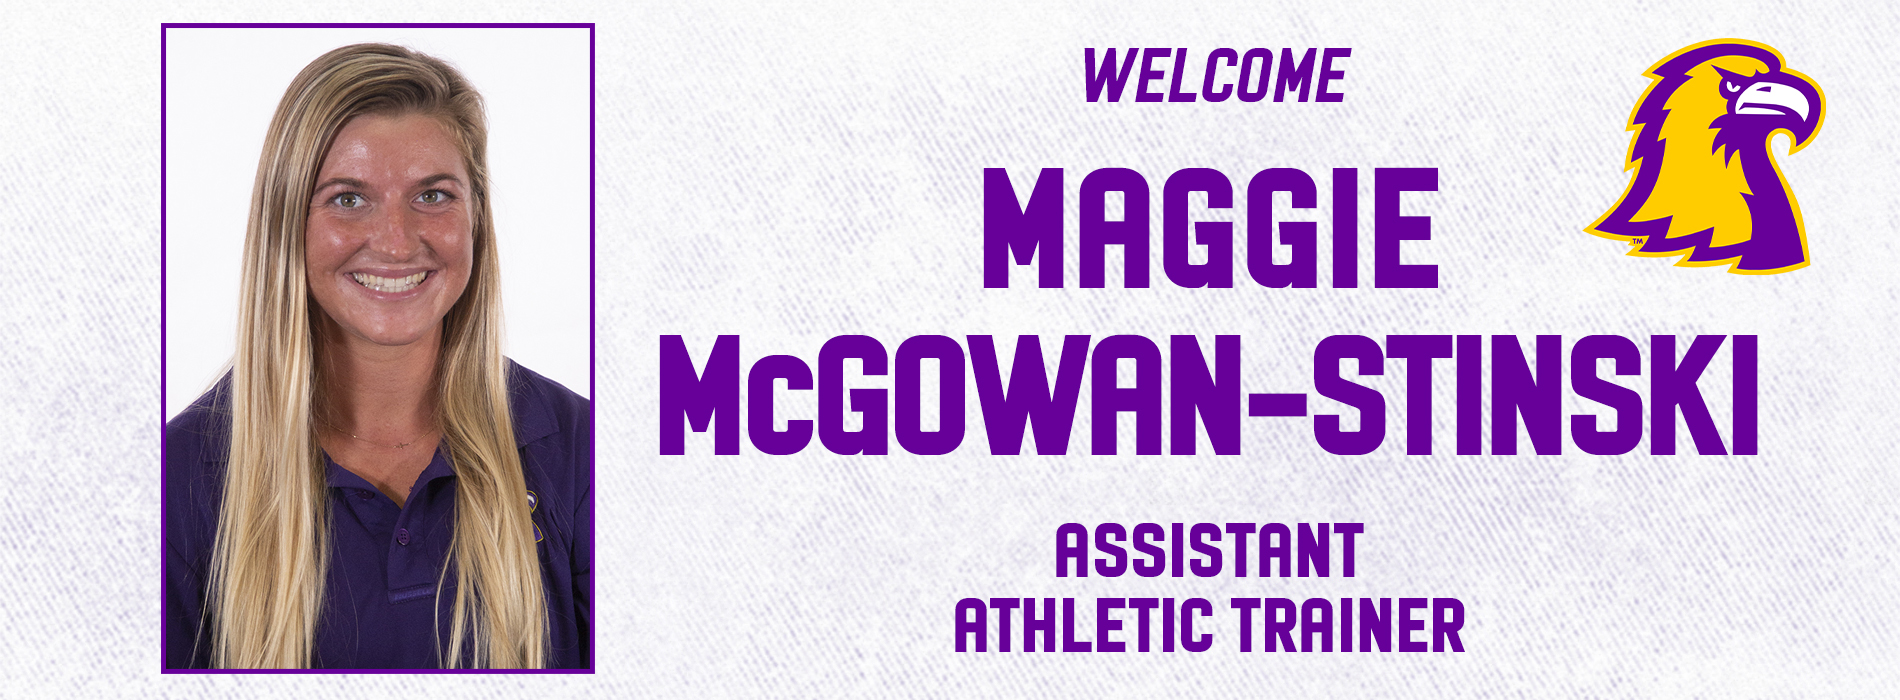 Maggie McGowan-Stinski joins Tech Sports Medicine staff as assistant athletic trainer